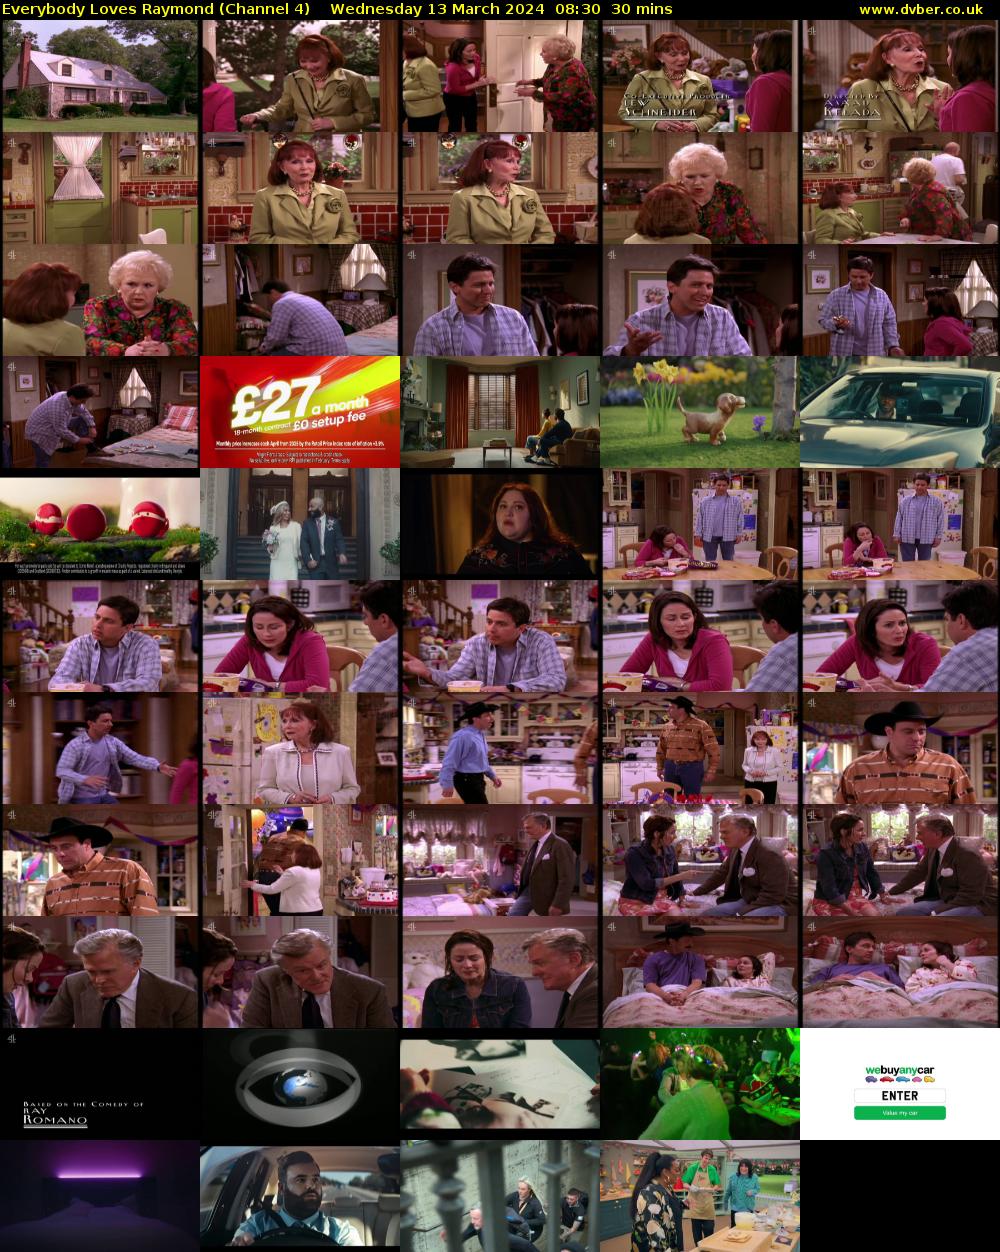 Everybody Loves Raymond (Channel 4) Wednesday 13 March 2024 08:30 - 09:00